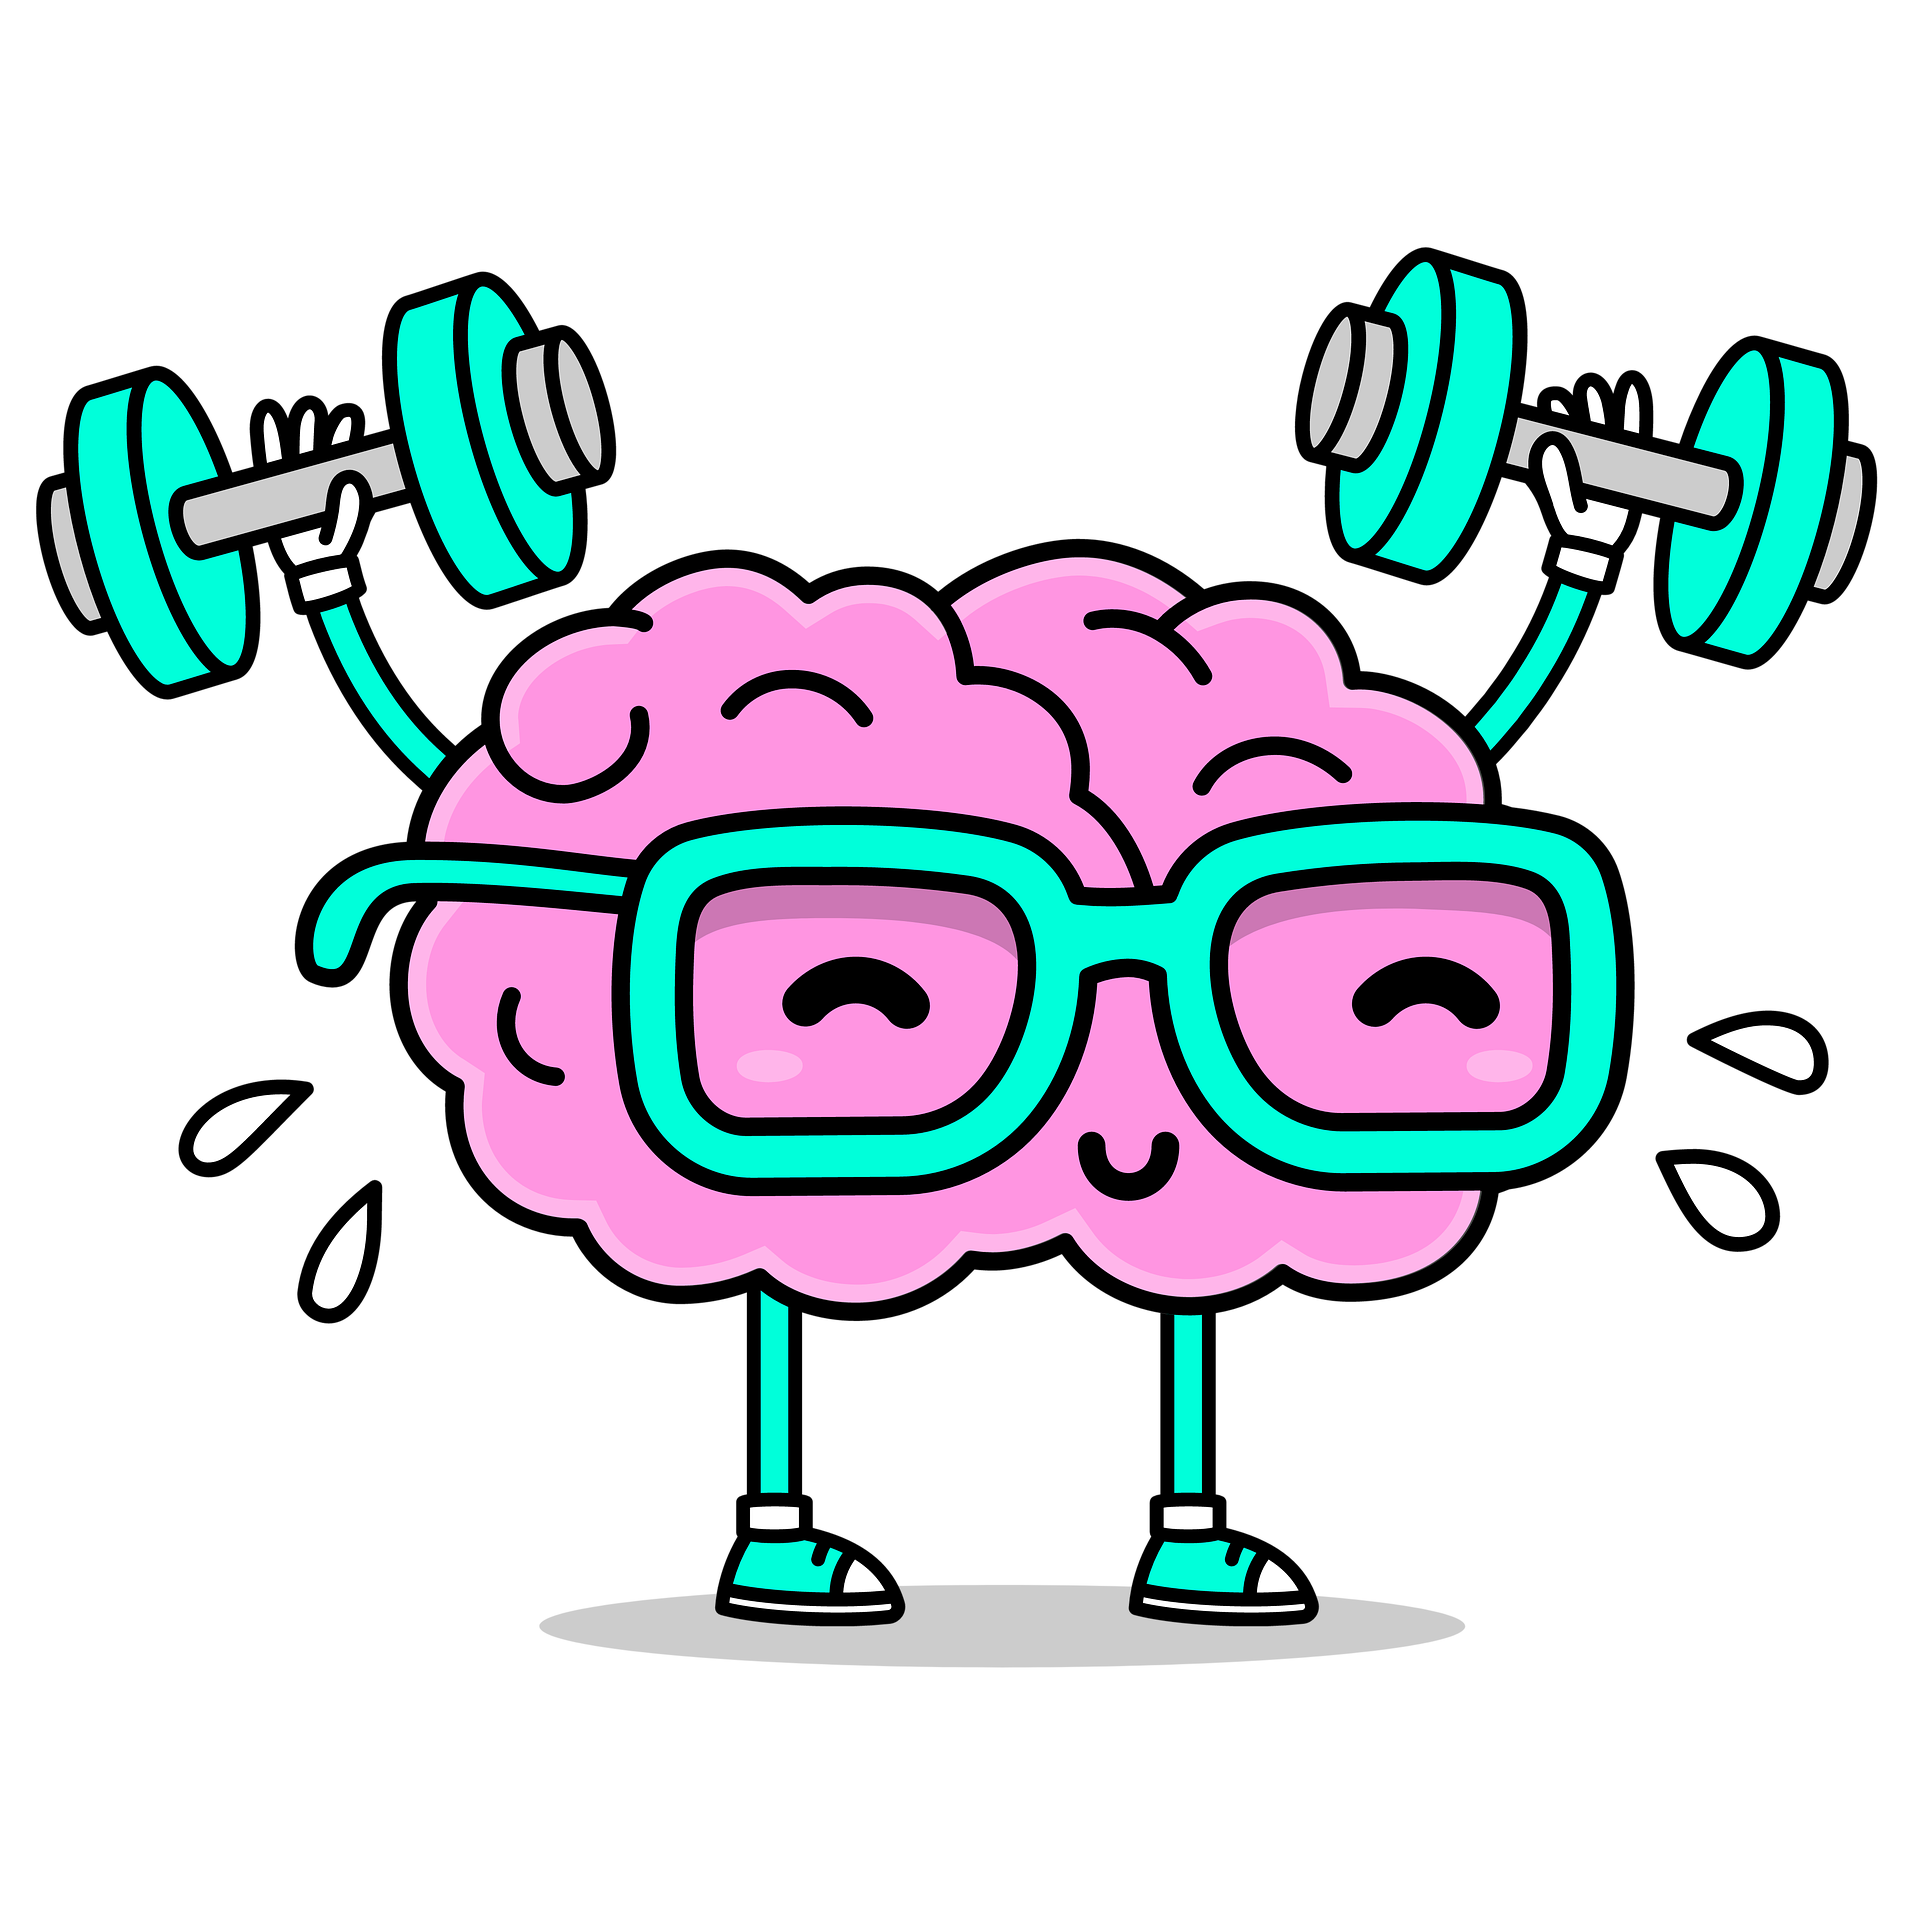 image of brain working out